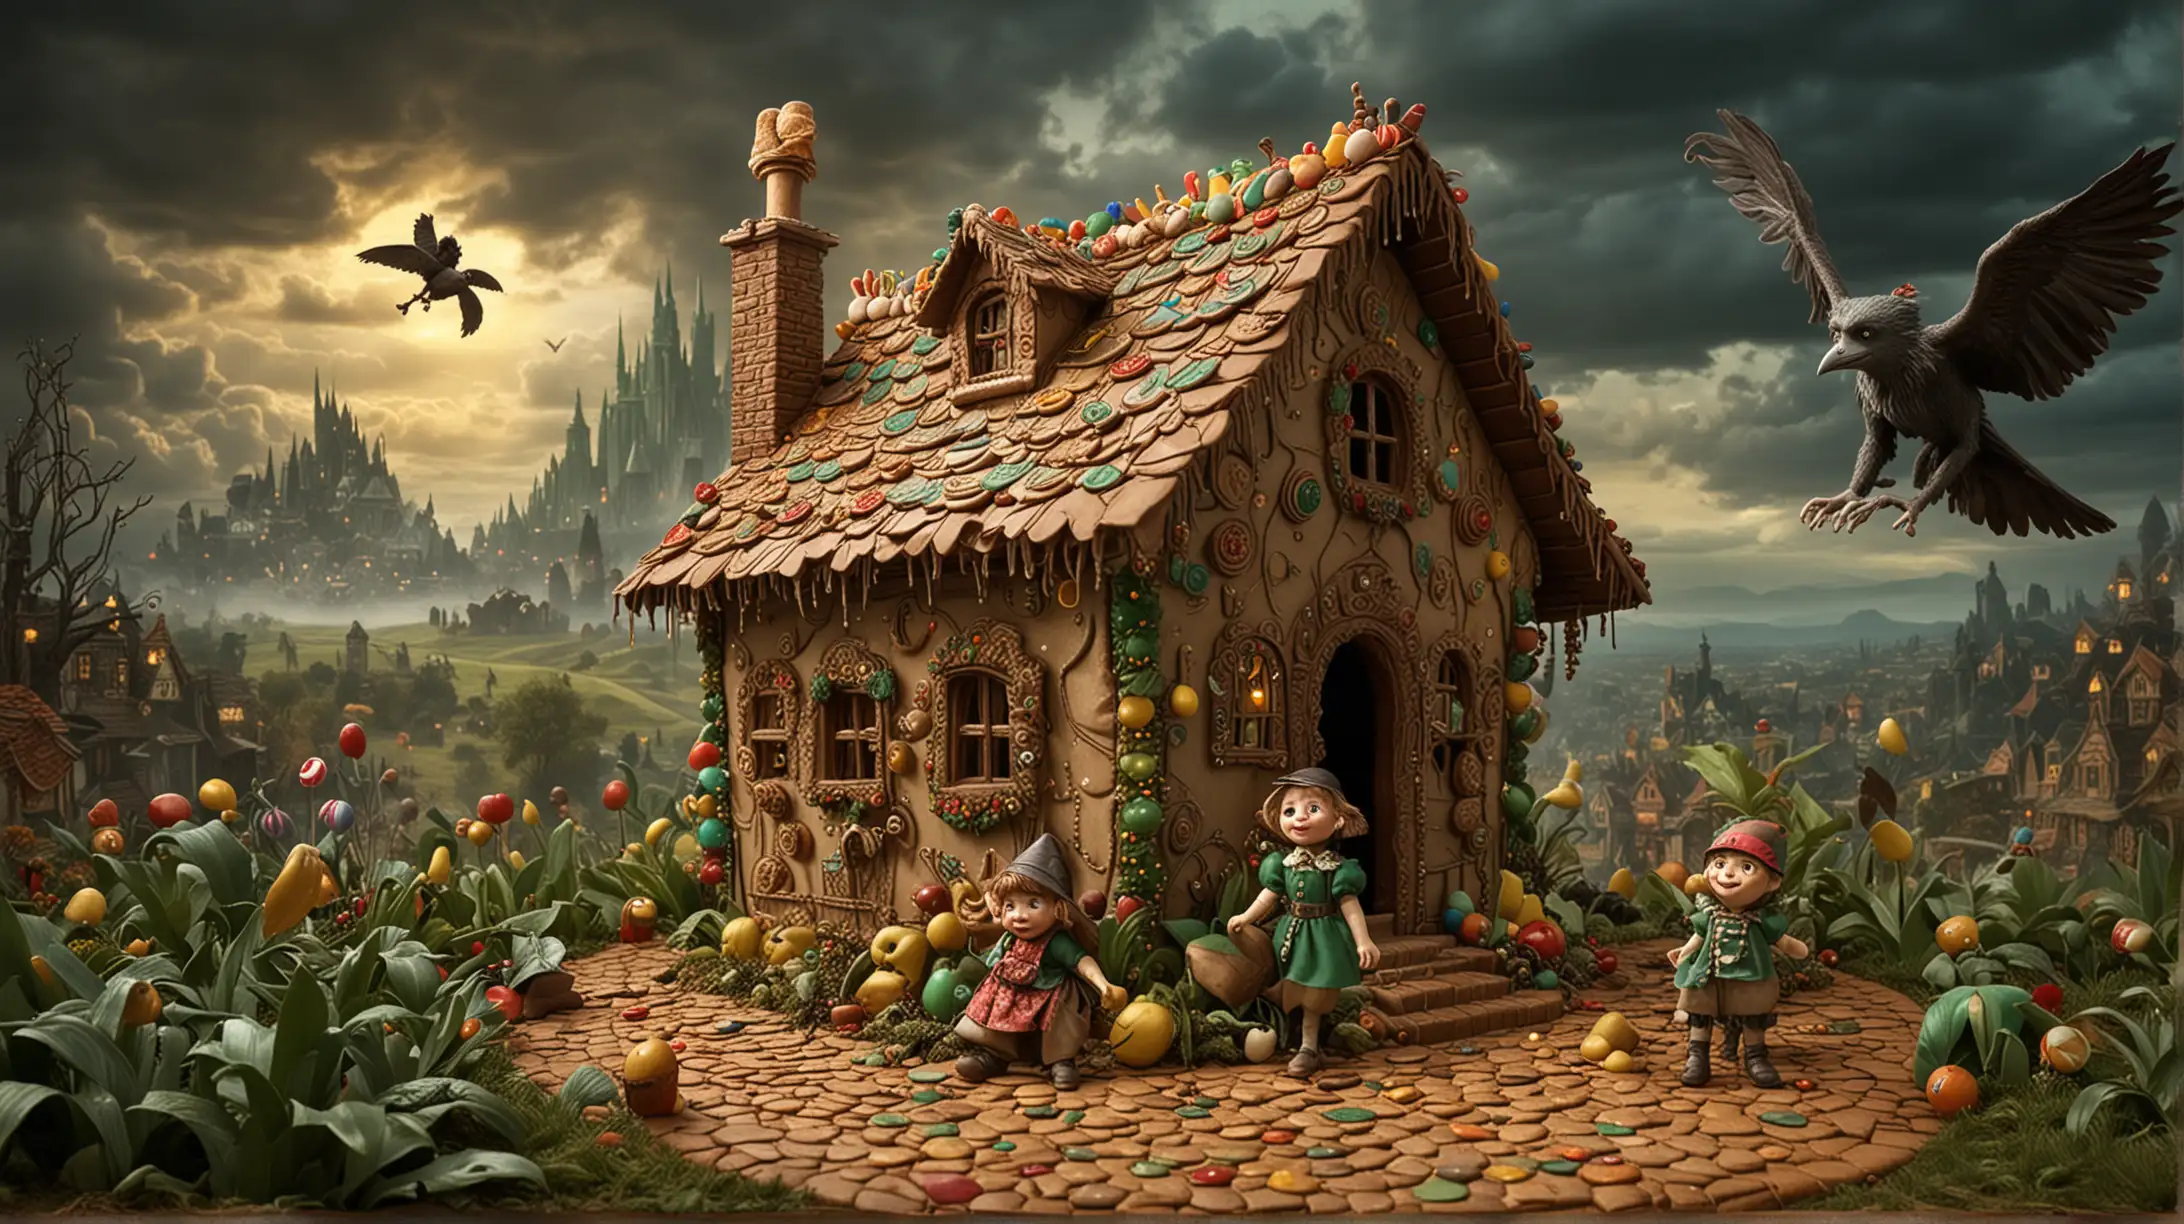 Hansel and Gretel Crush Witch Under Gingerbread House in Oz